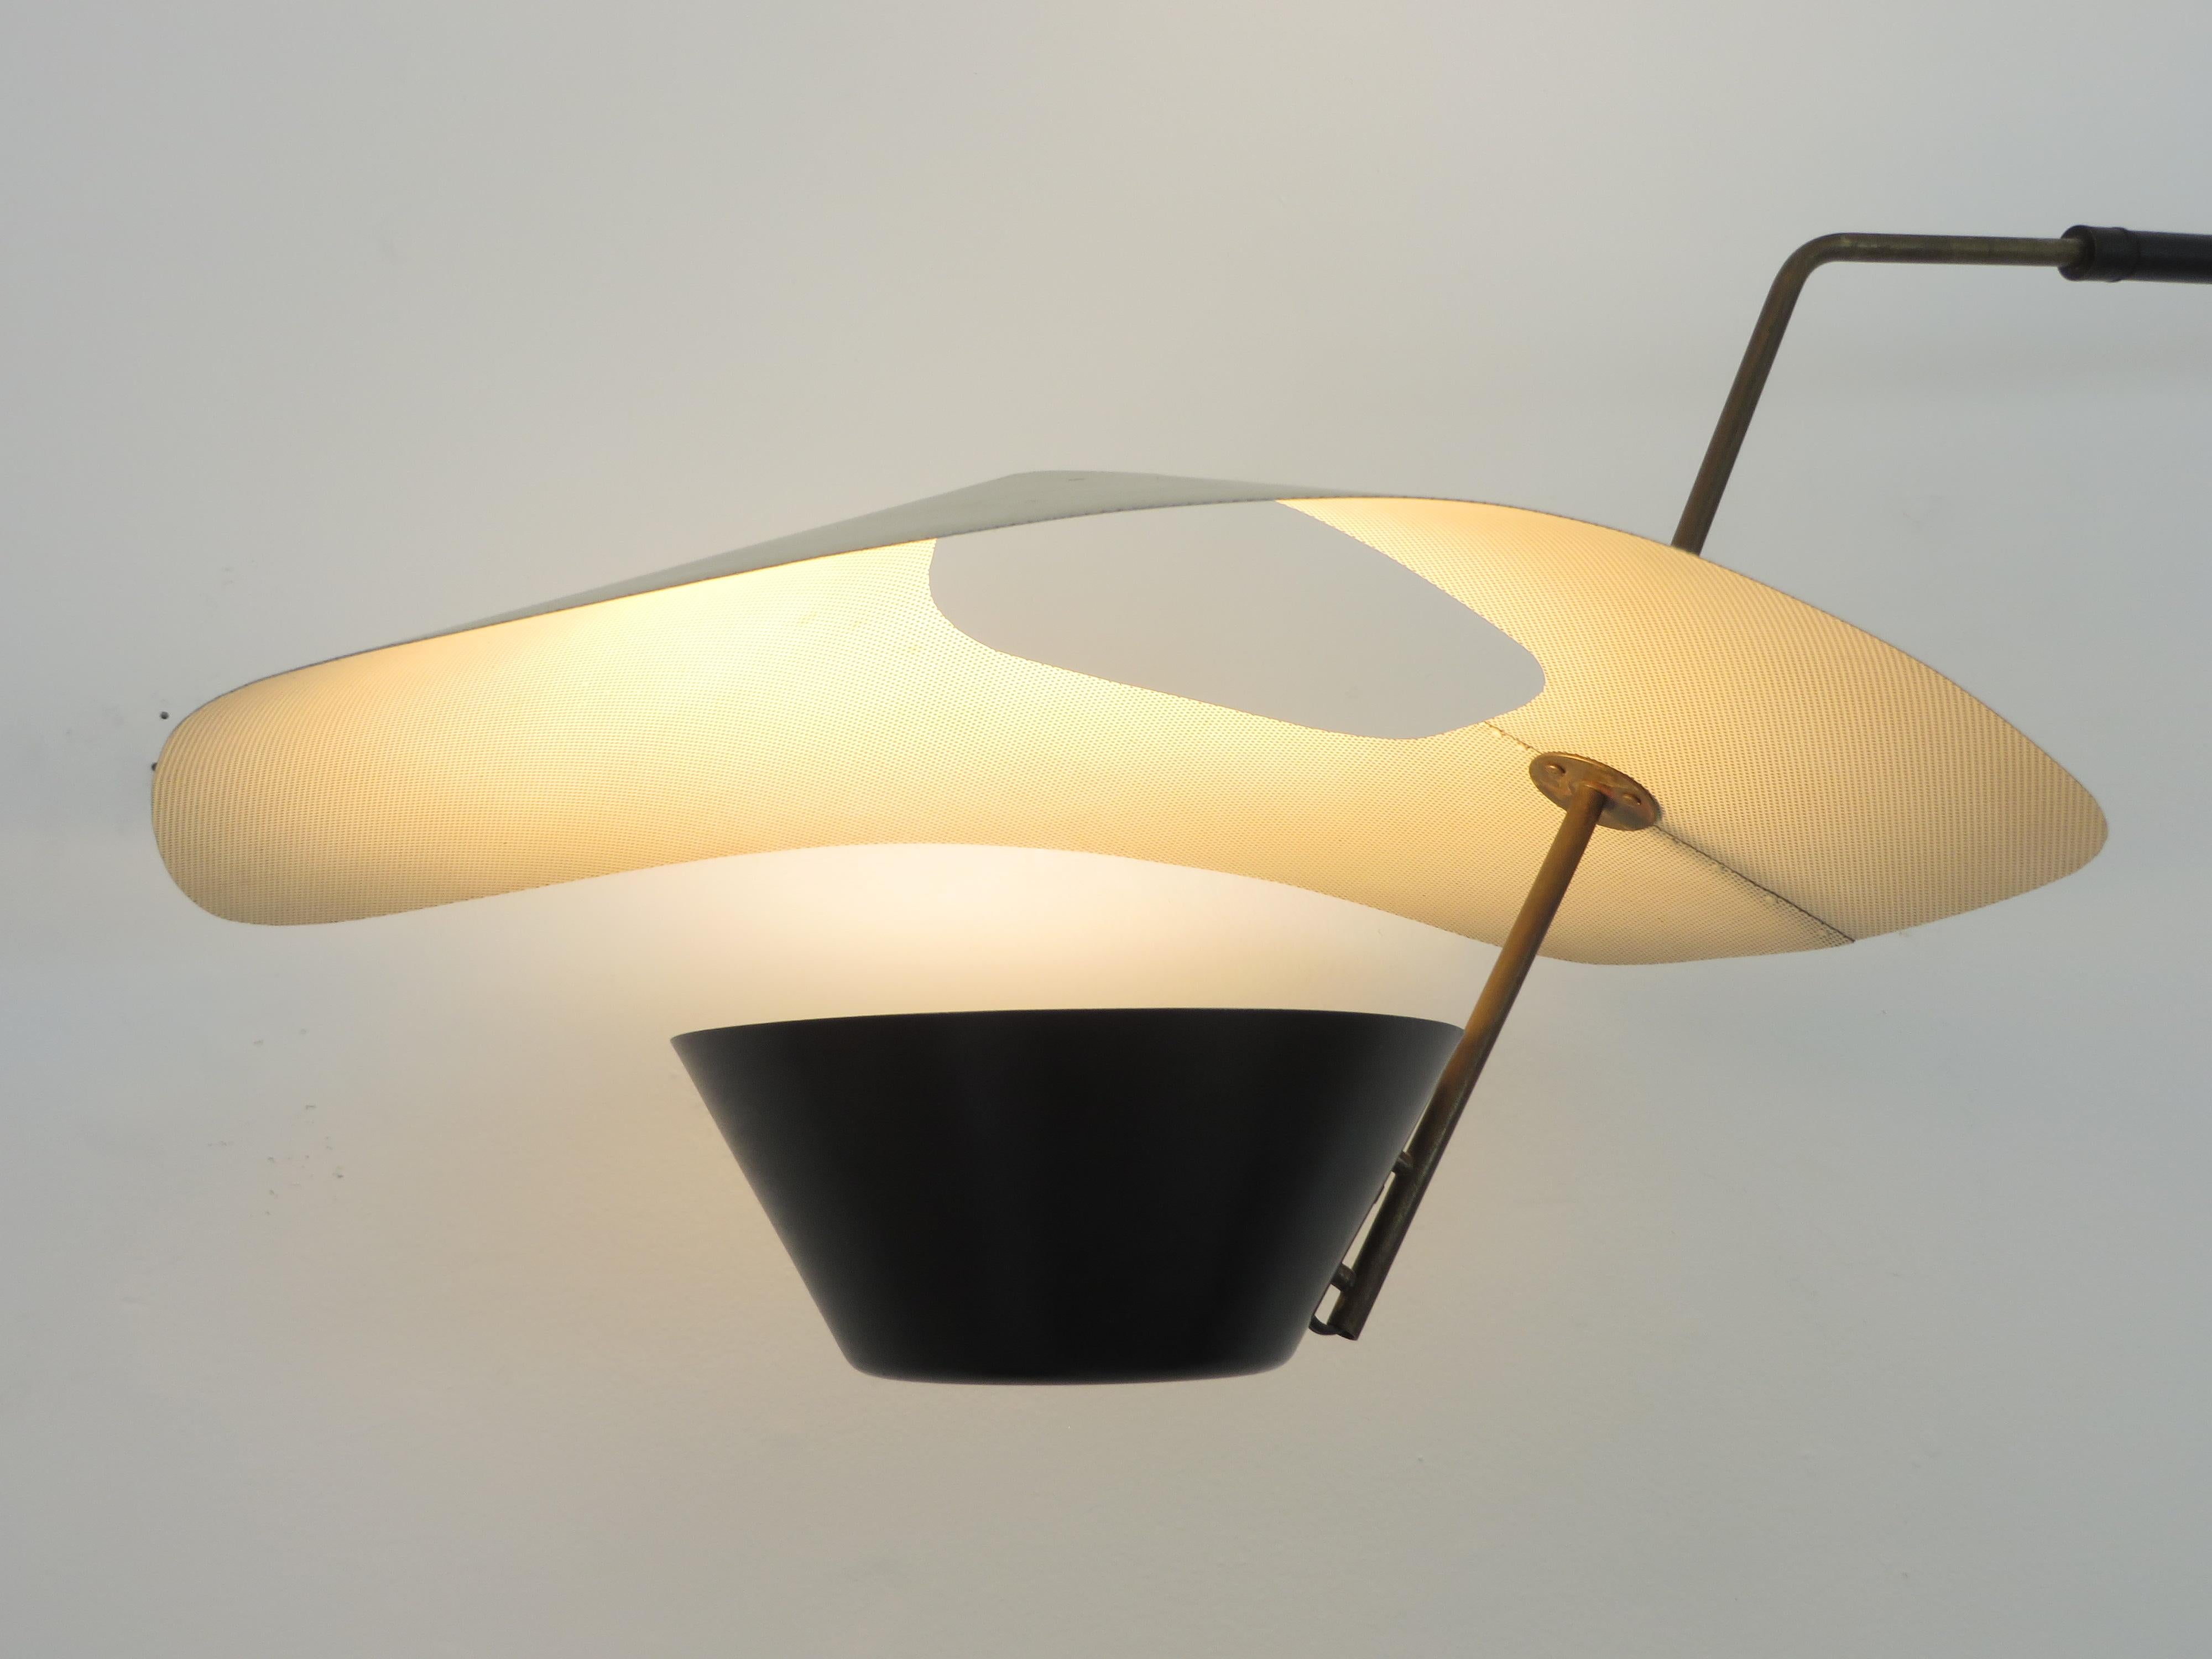 Kite Cerf Volant Applique Wall Light by Pierre Guariche Editioned by Disderot 10